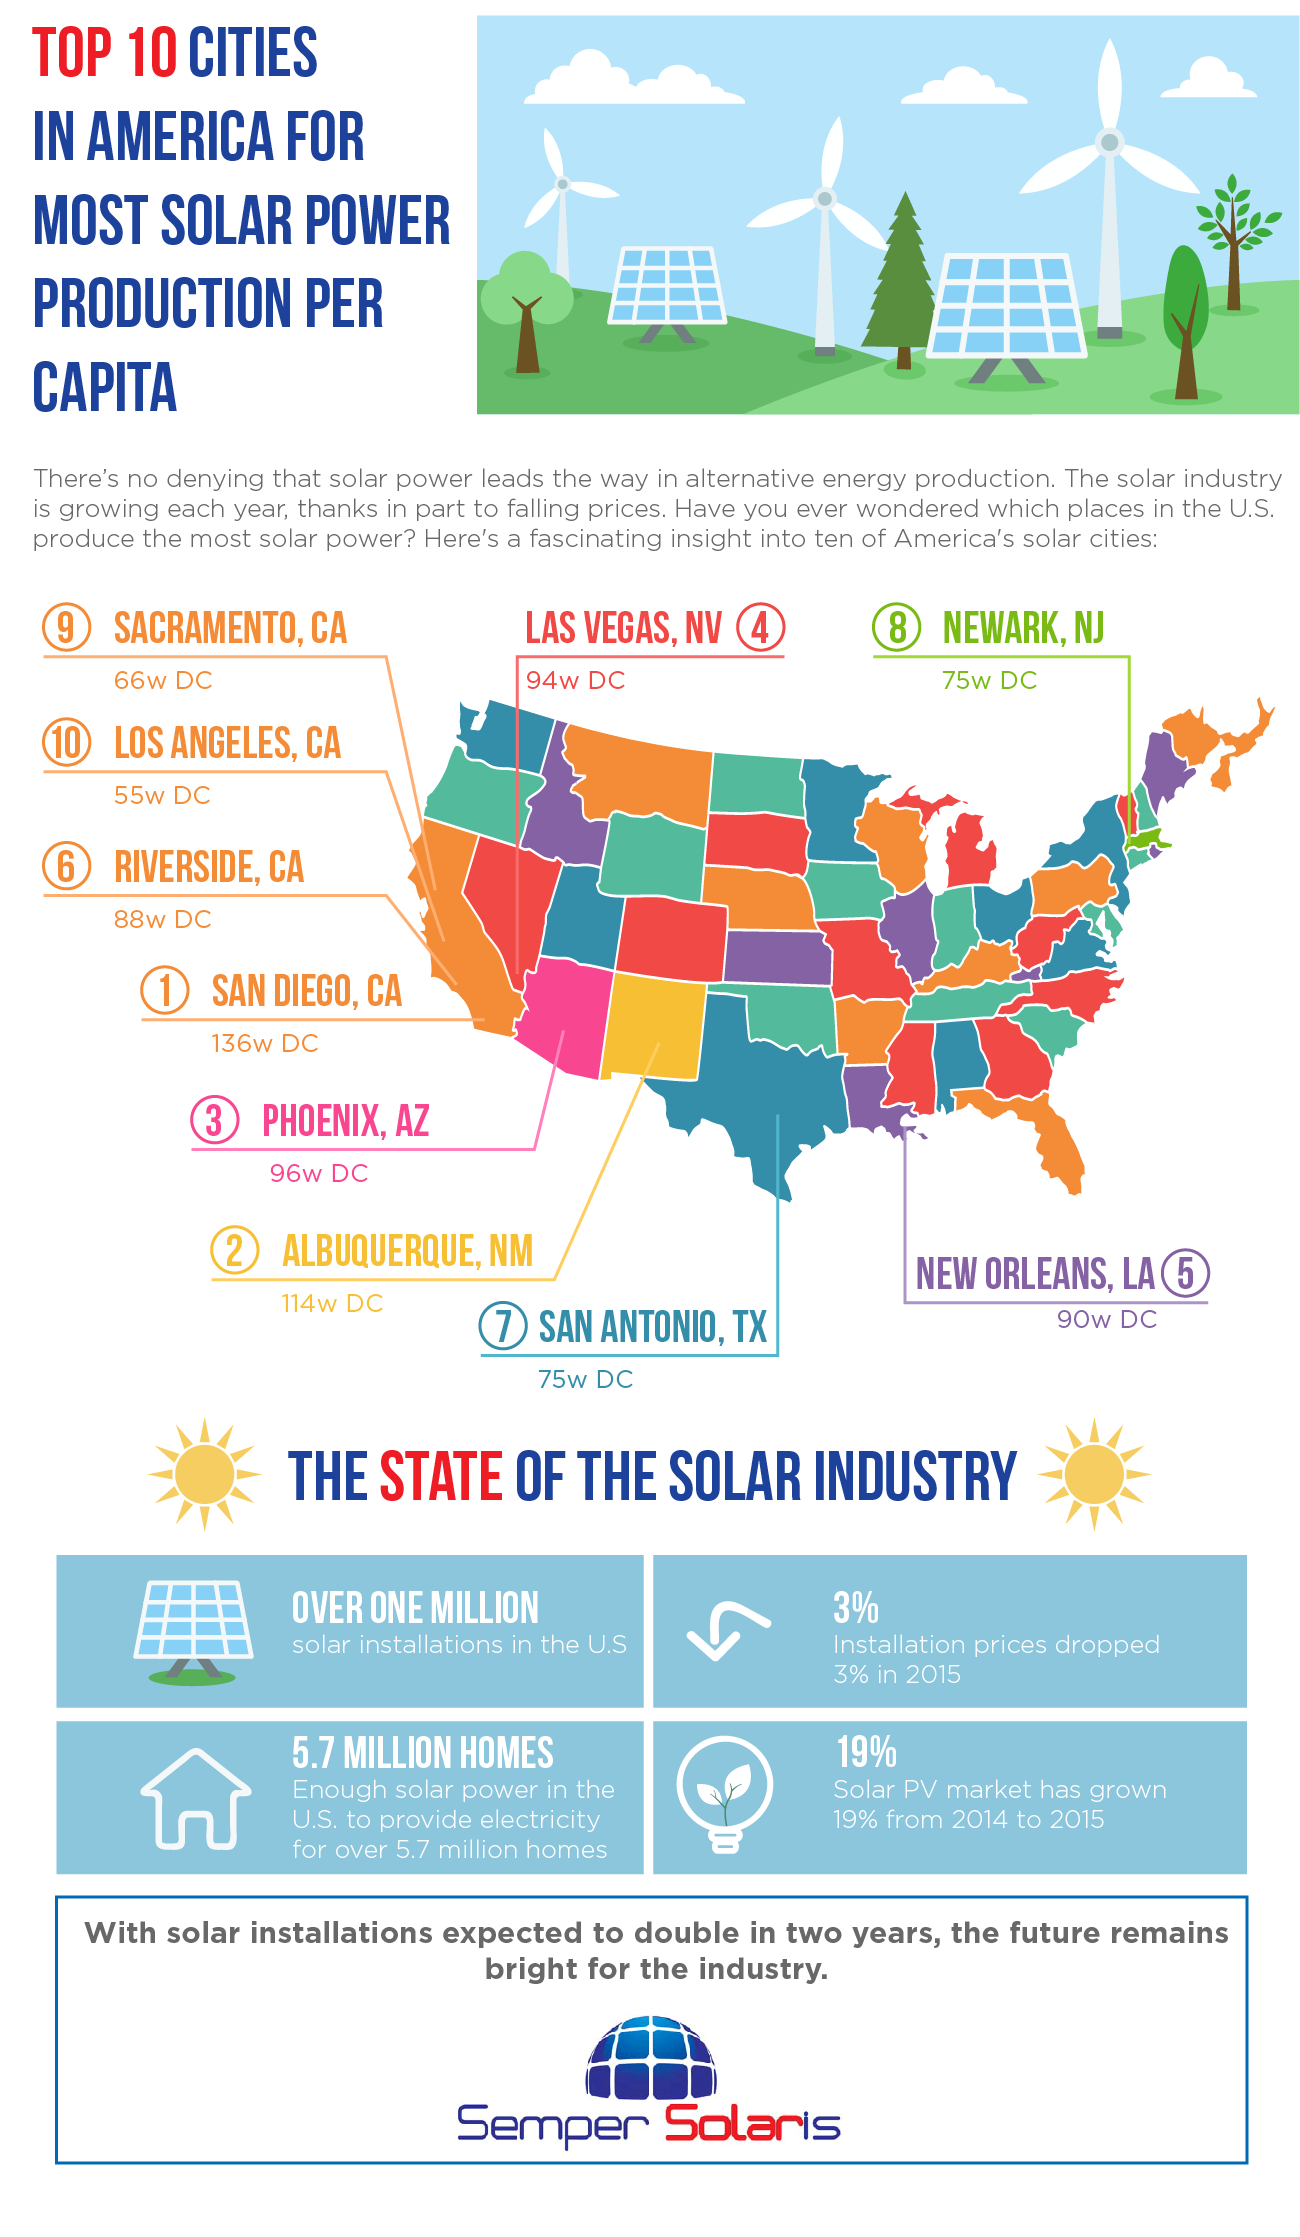 Top 10 Cities for Solar